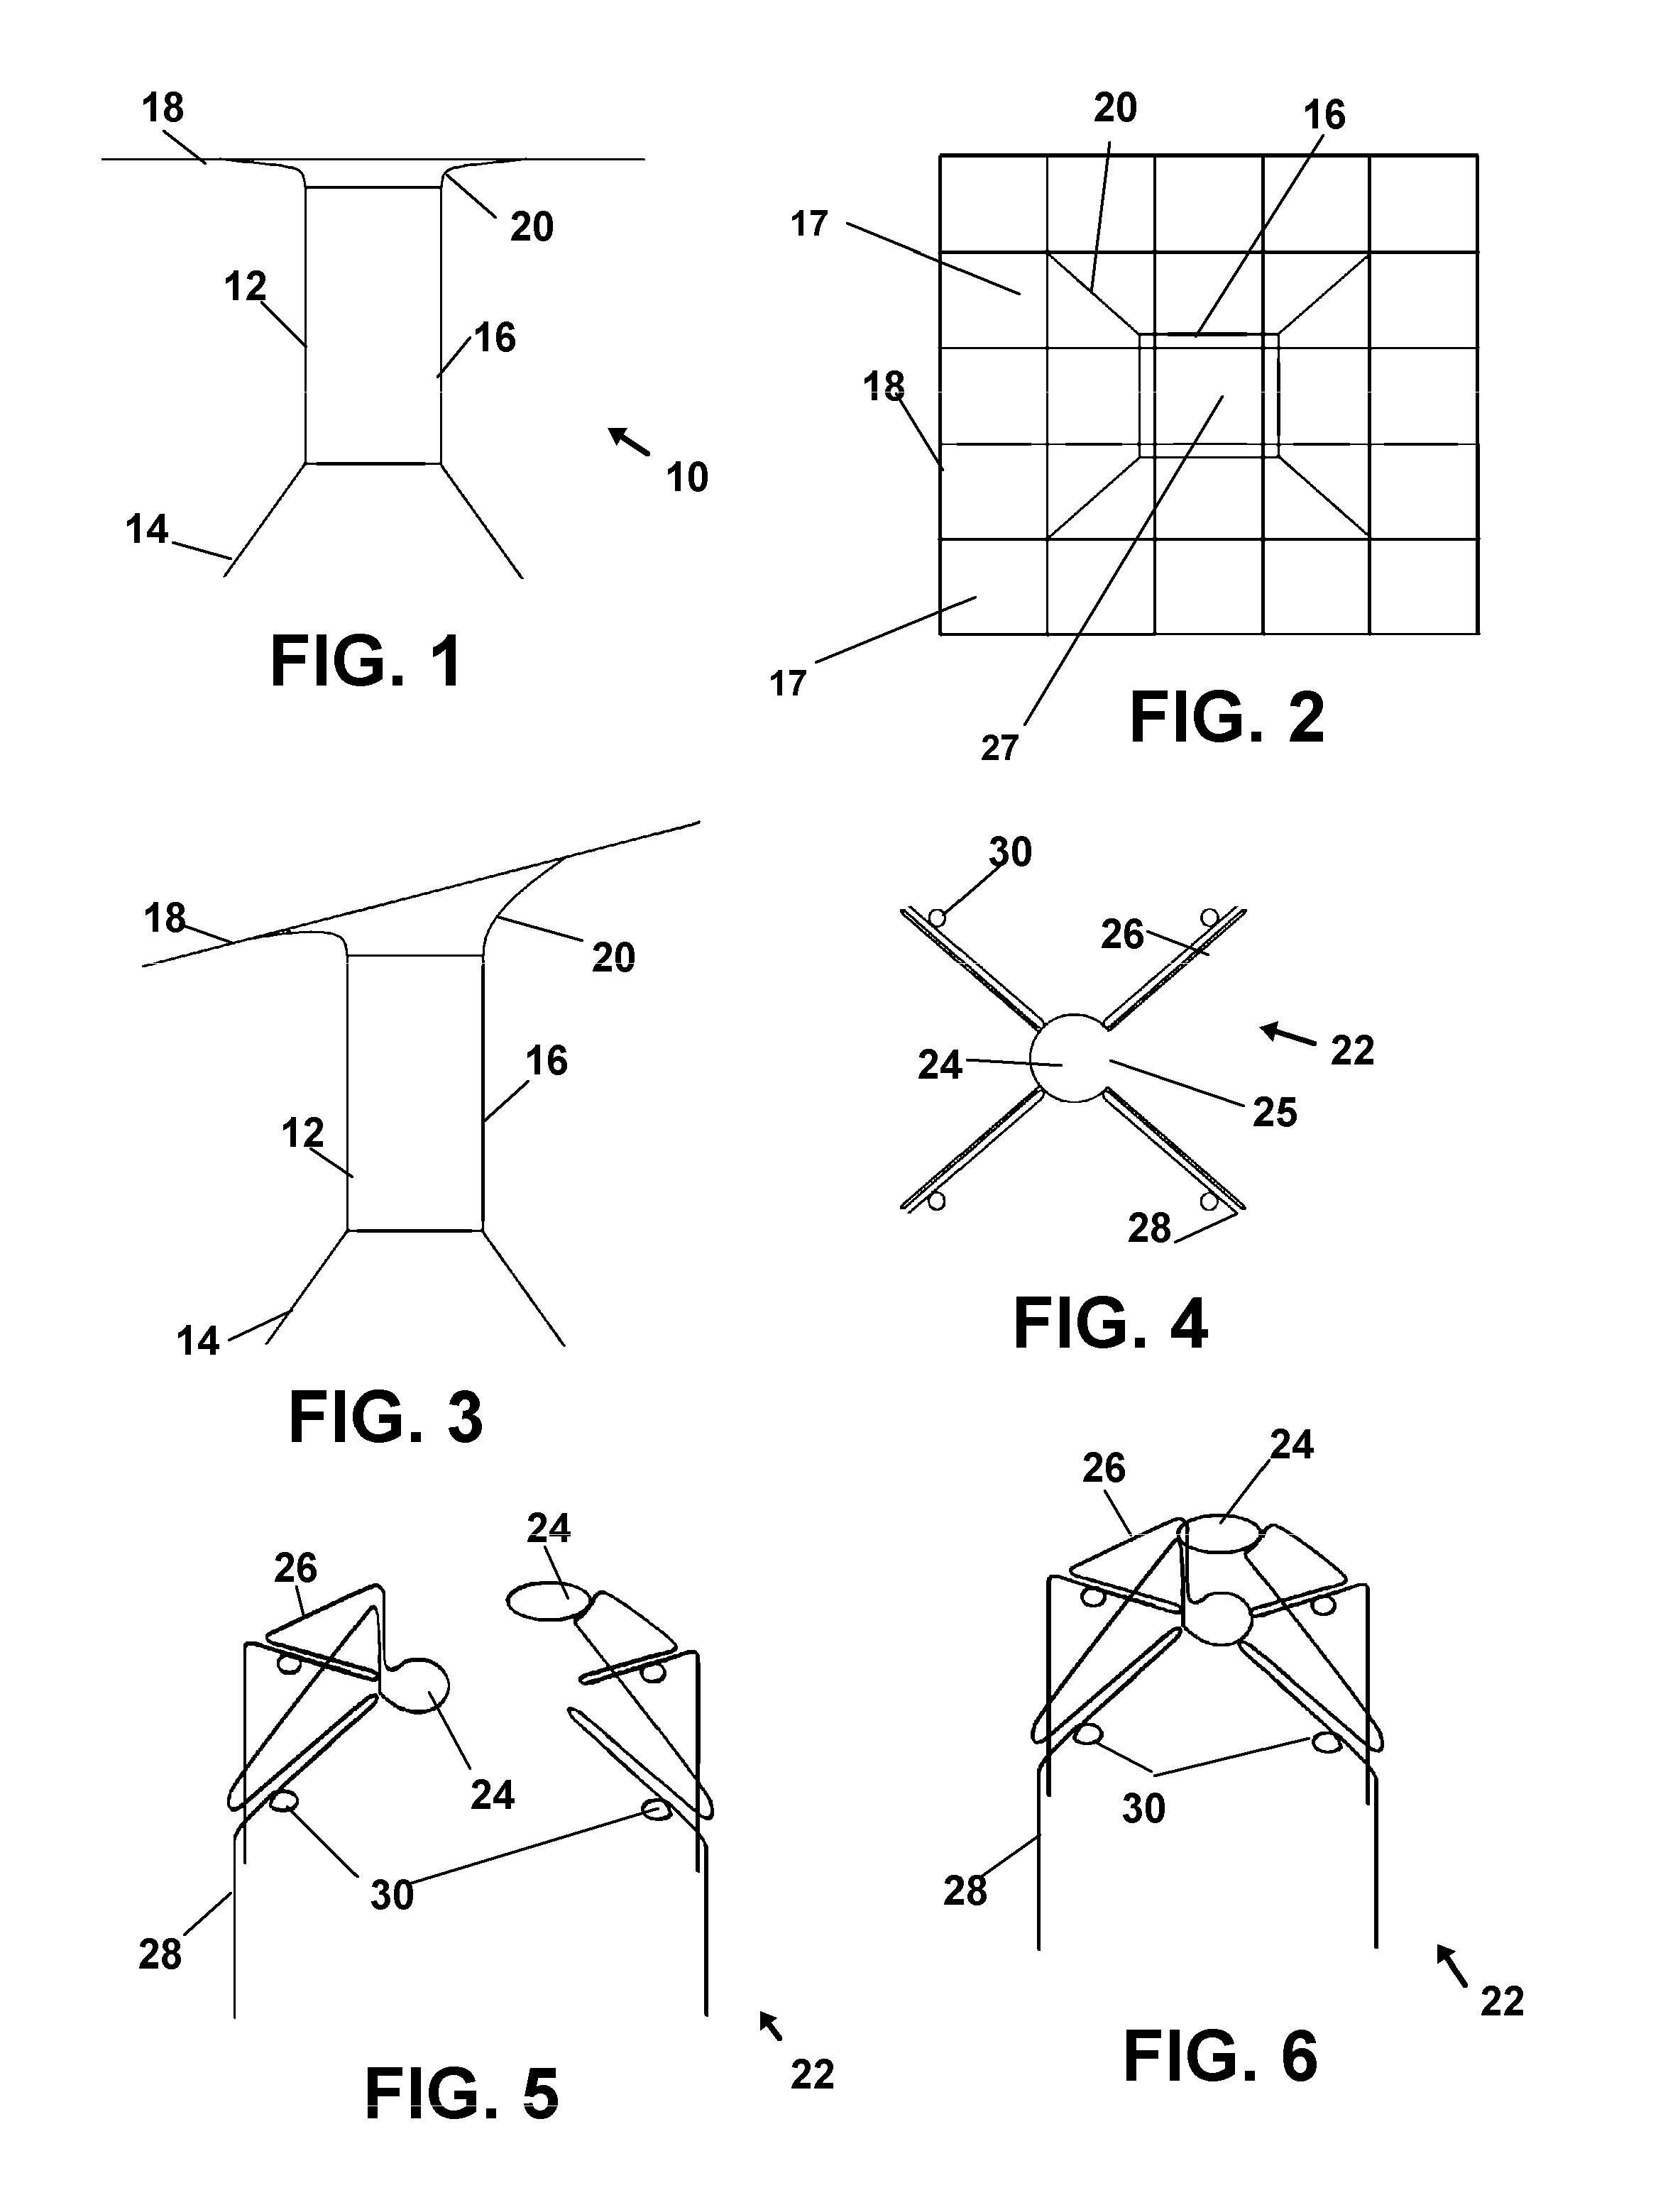 Plant Support and Stabilization System